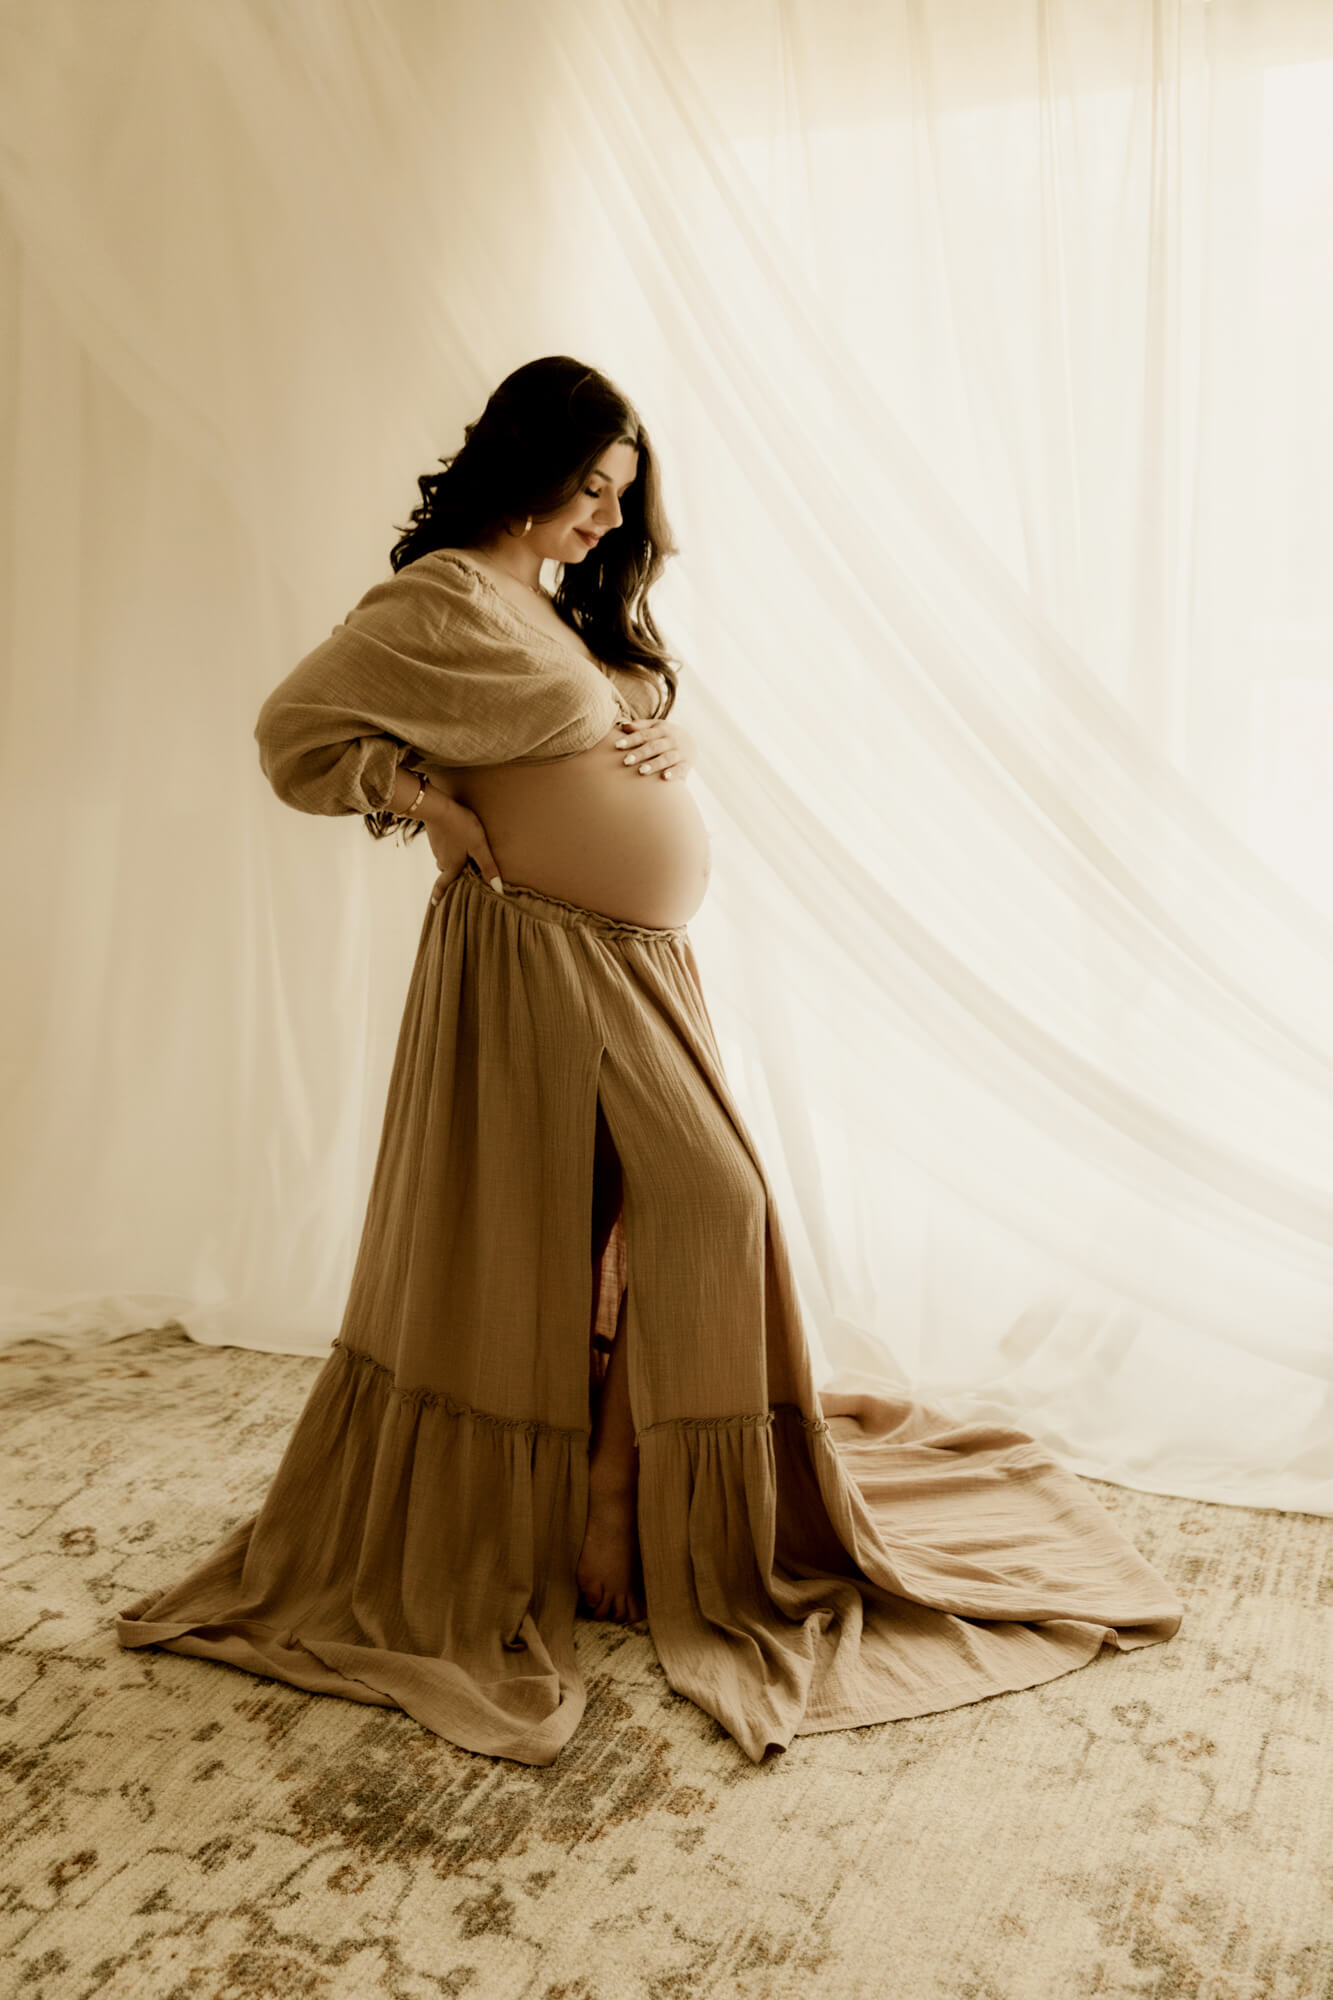 Pregnant mother wearing a two-piece beige dress posed for her maternity photo.